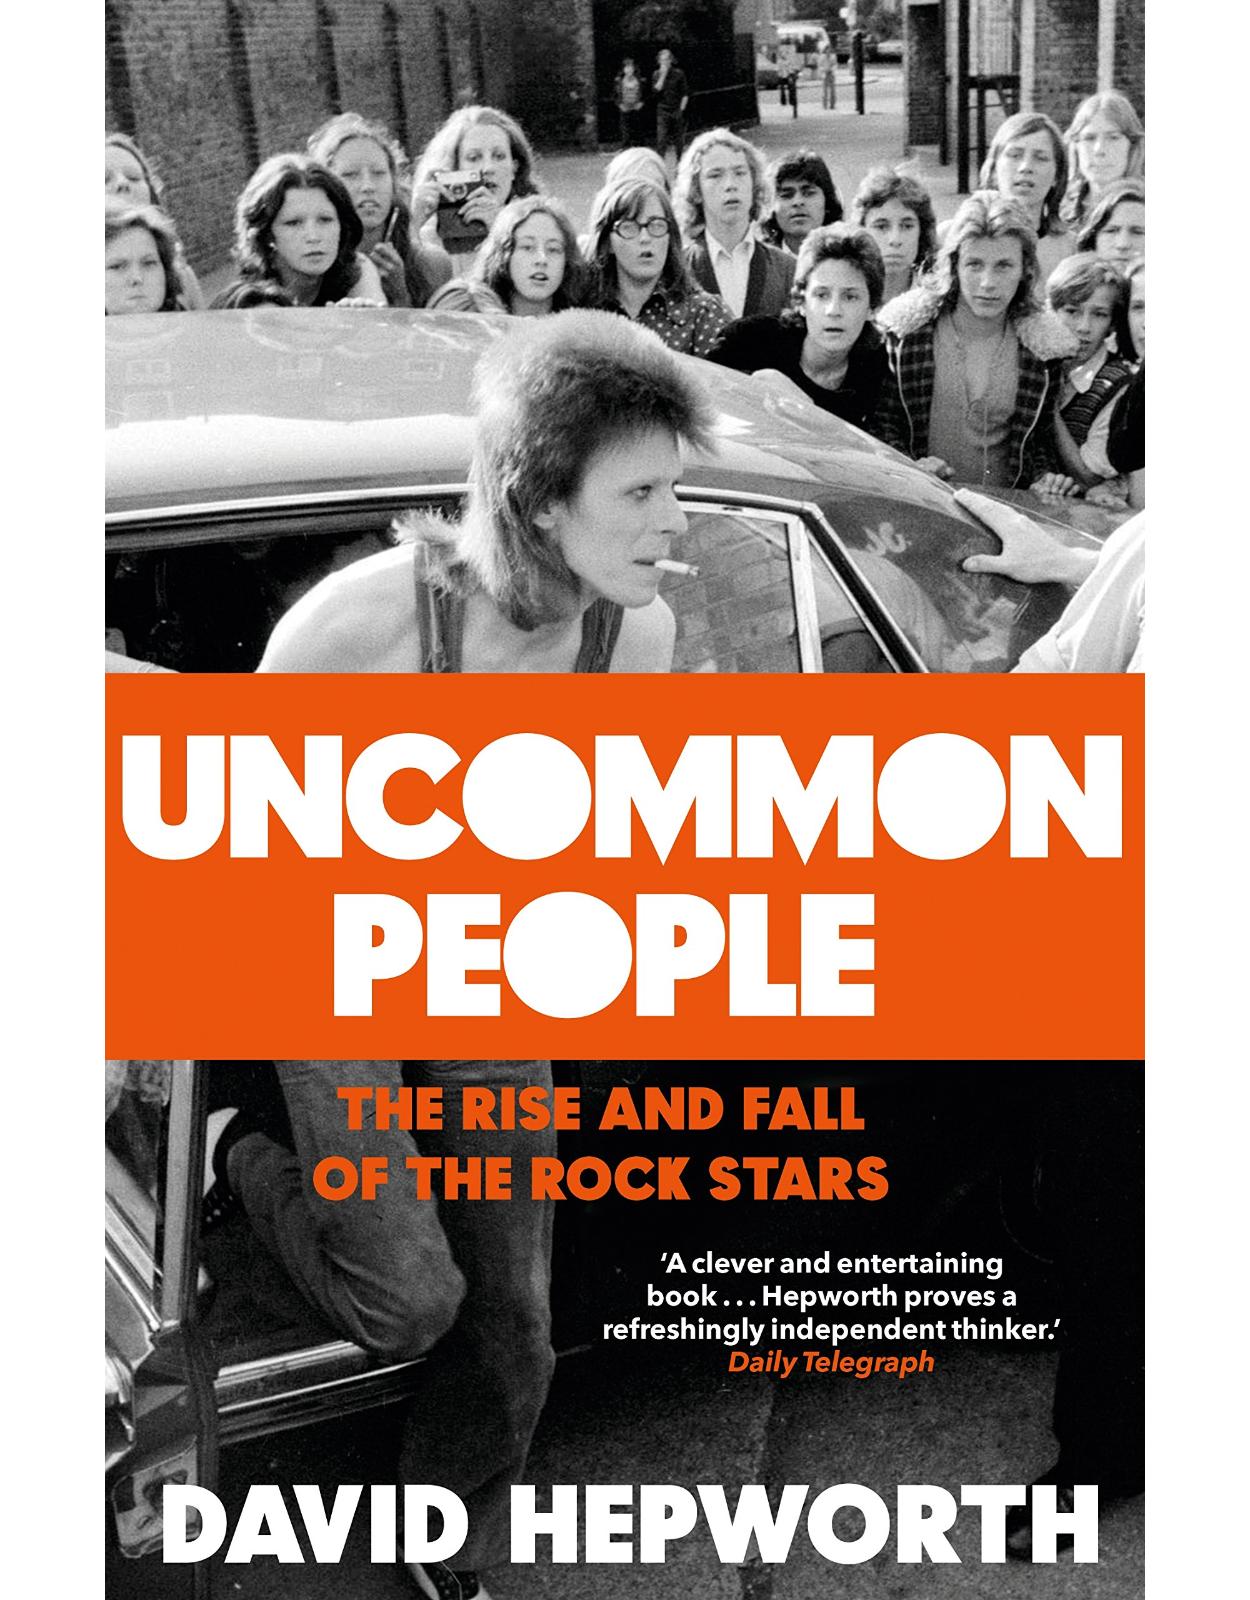 Uncommon People: The Rise and Fall of the Rock Stars 1955-1994